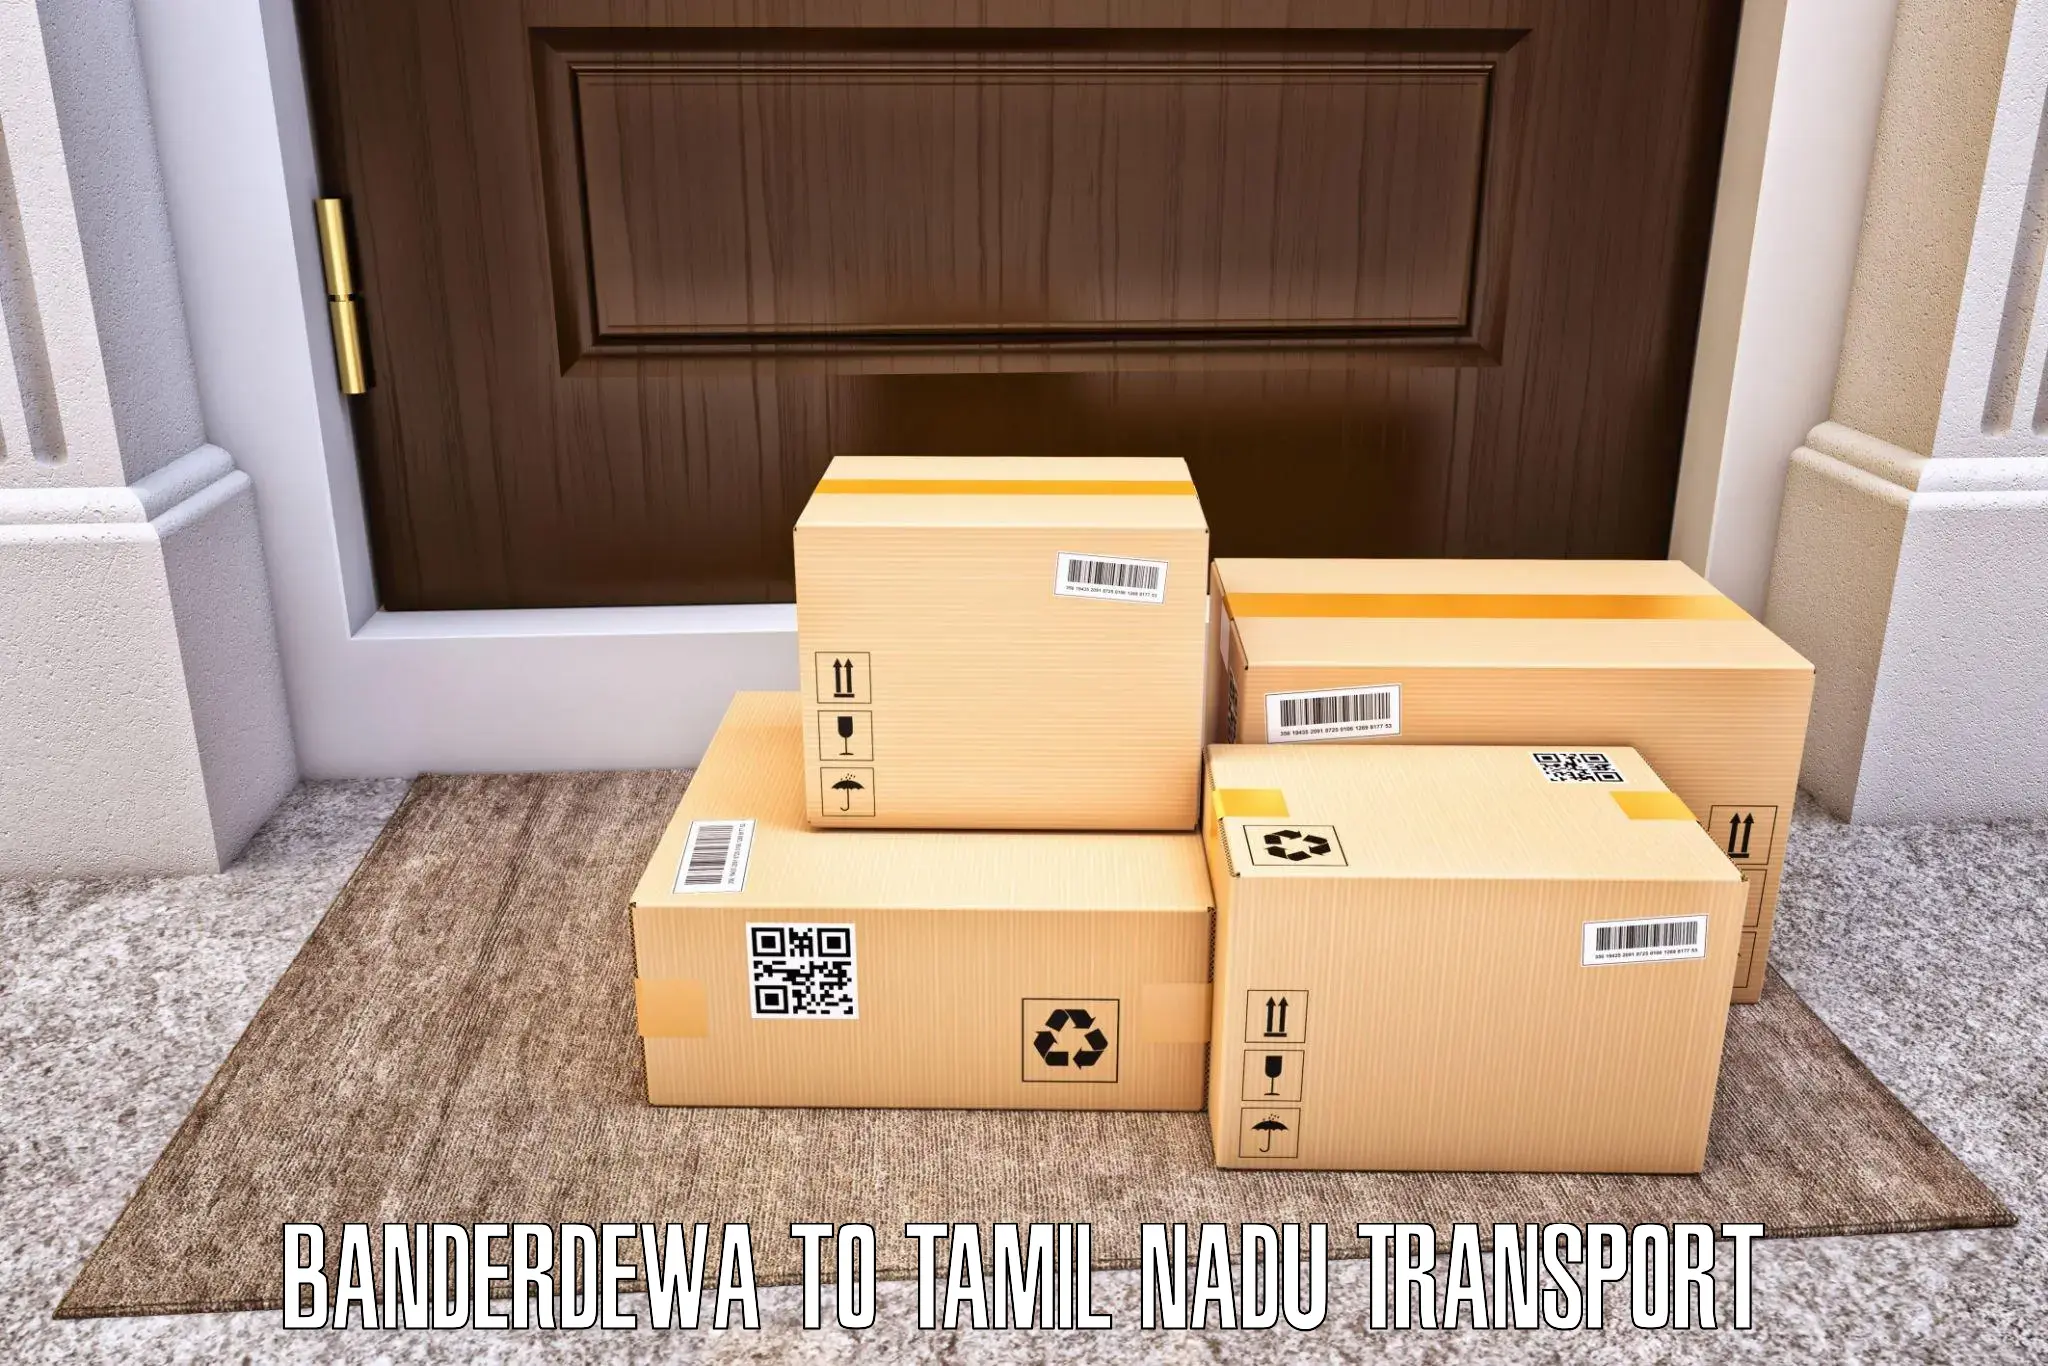 Luggage transport services Banderdewa to Shanmugha Arts Science Technology and Research Academy Thanjavur